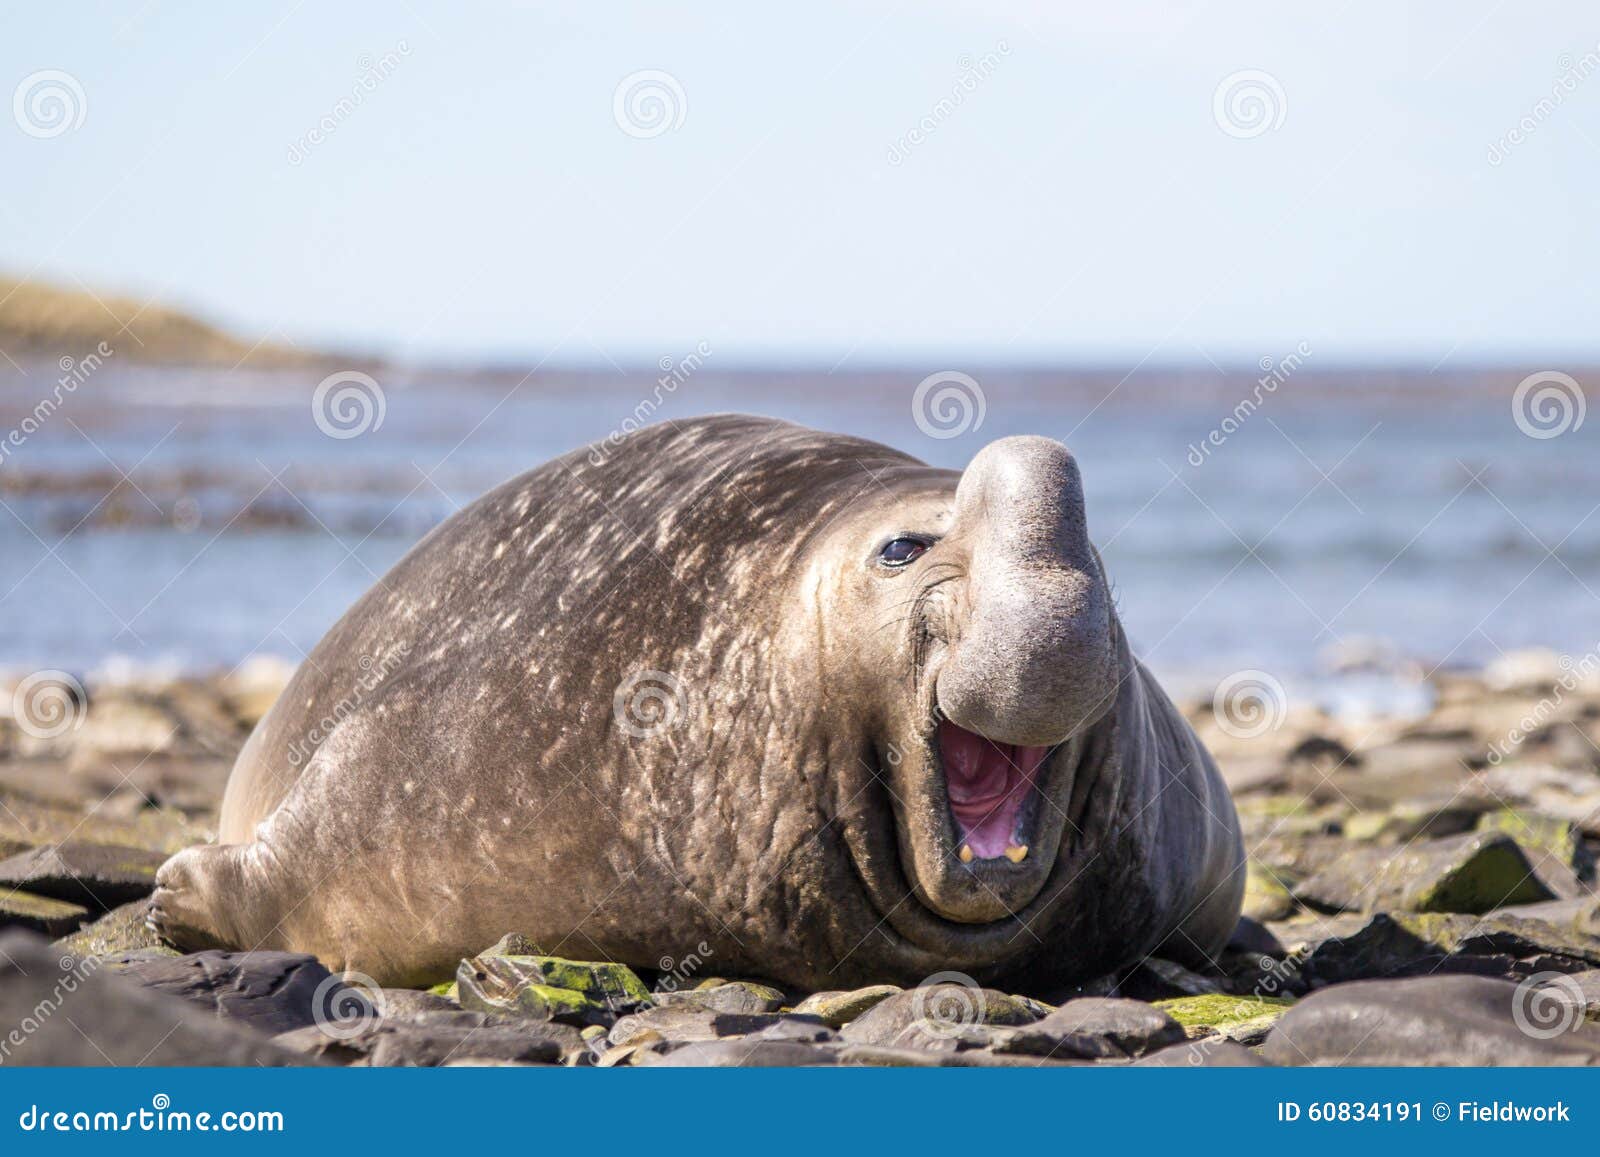 laughing smiling southern elephant seal